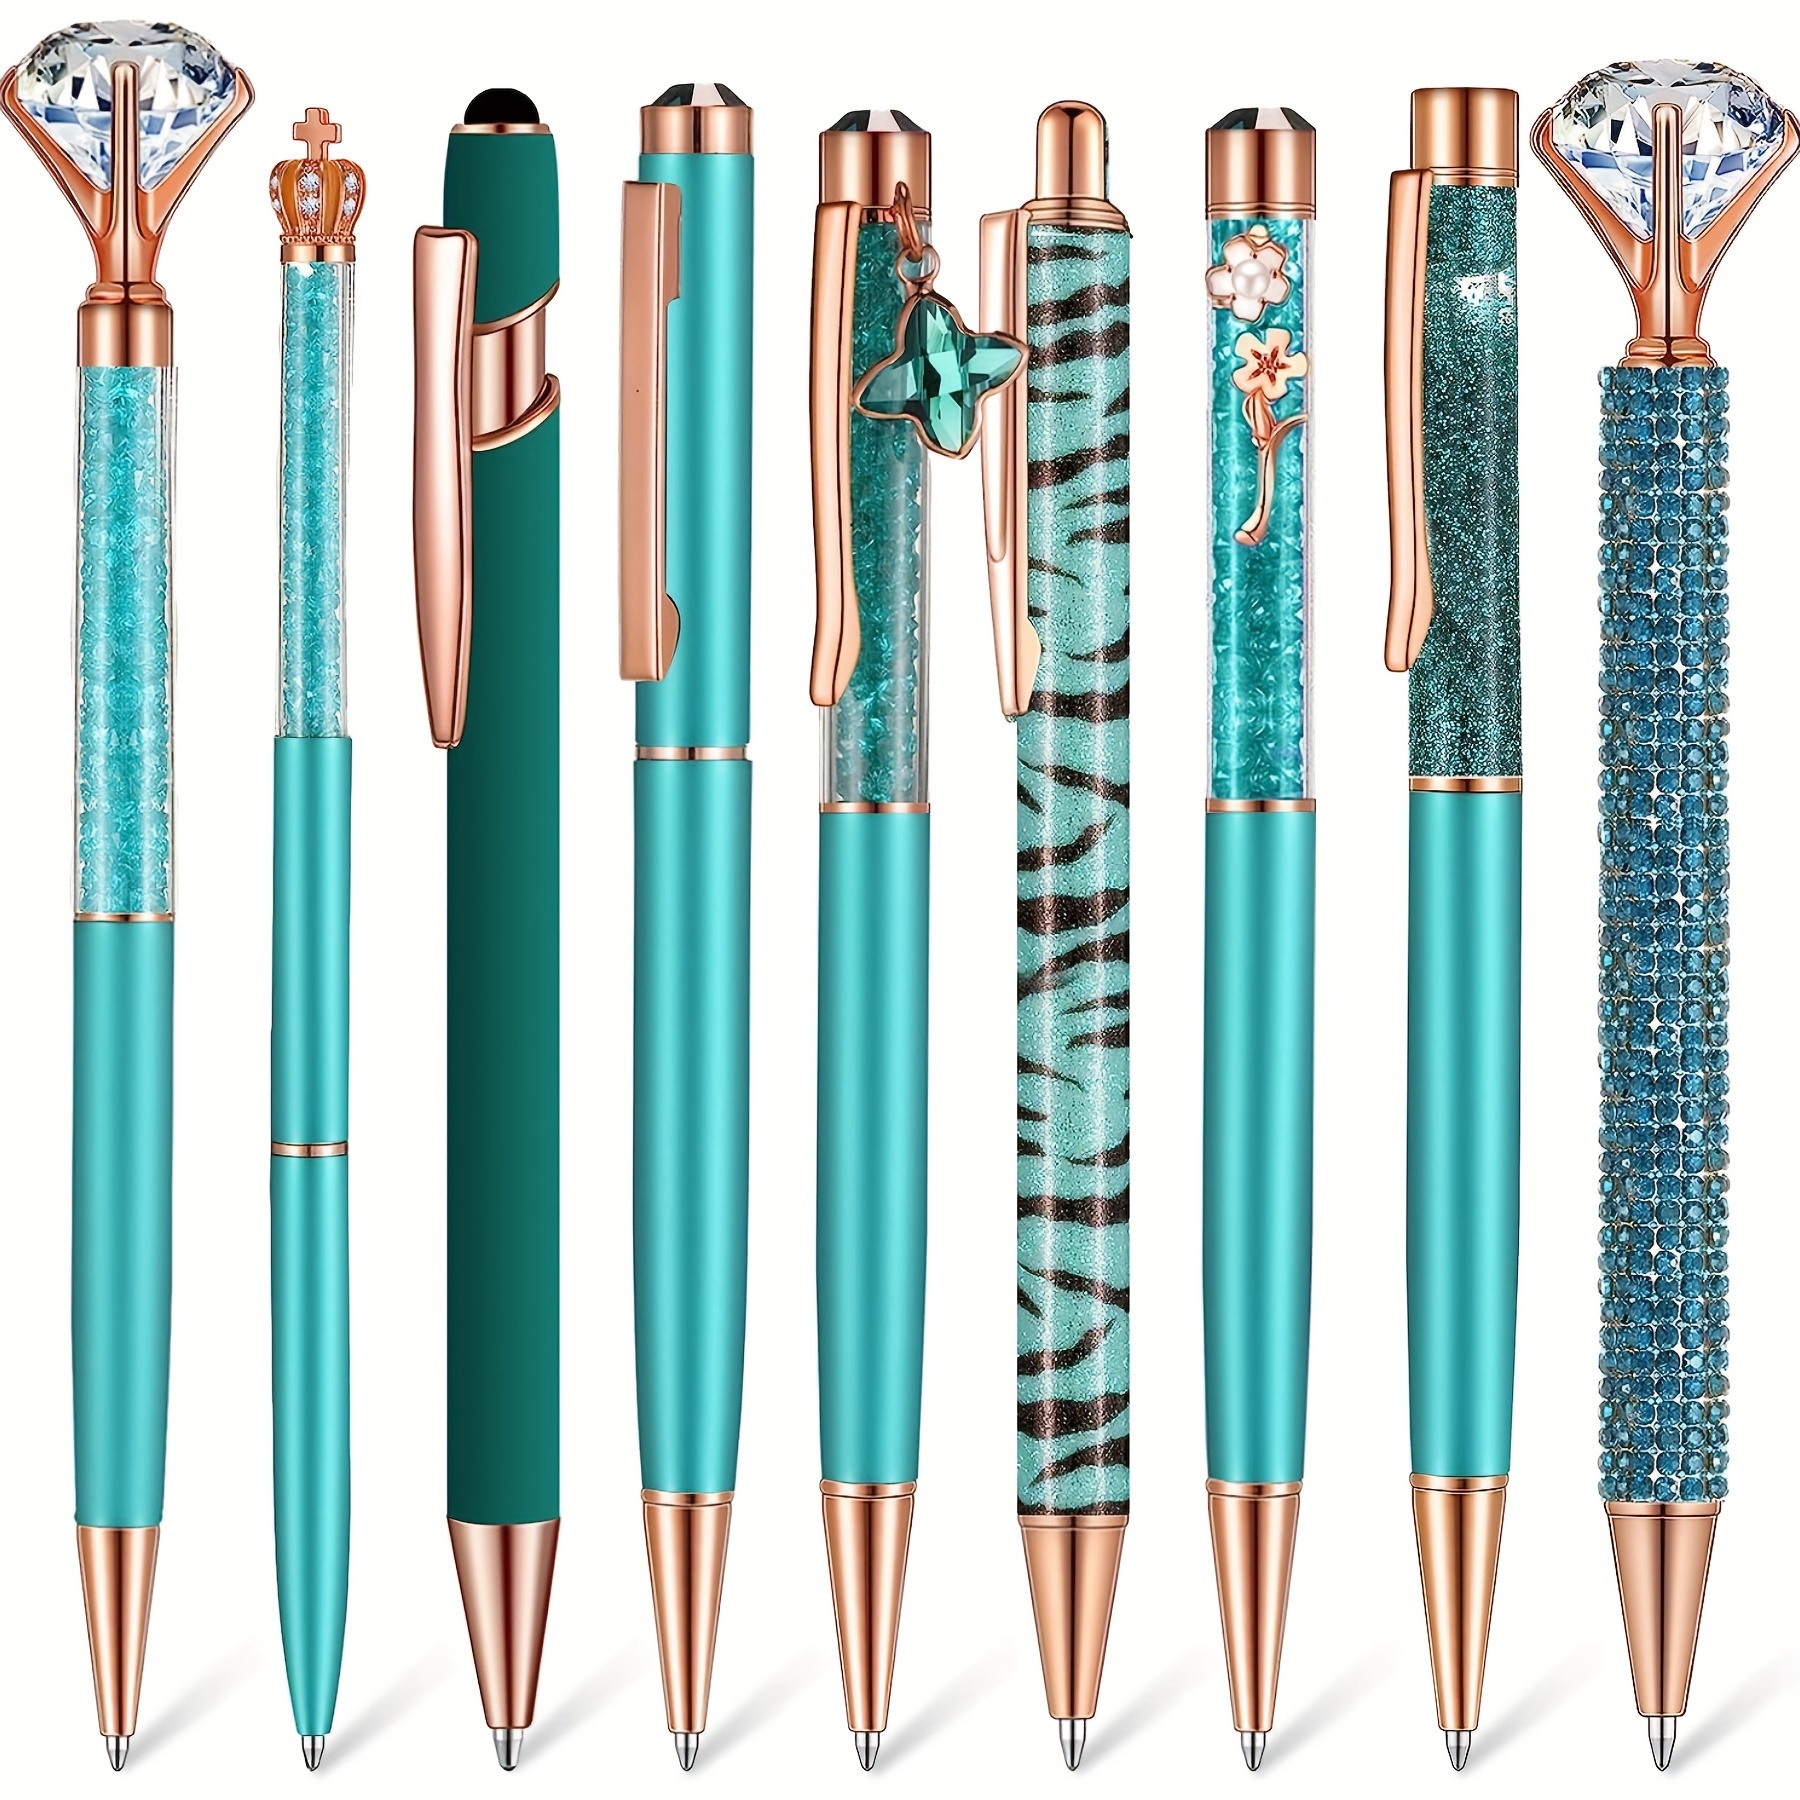 

9pcs Pens, Cute Diamond Pens, Metal Pens For Journal Use, Black Ink, Expandable Crystal Glitter Pens, Gift Style Pens, Suitable For Ladies, Schools, Weddings, Office Desks, Household Items